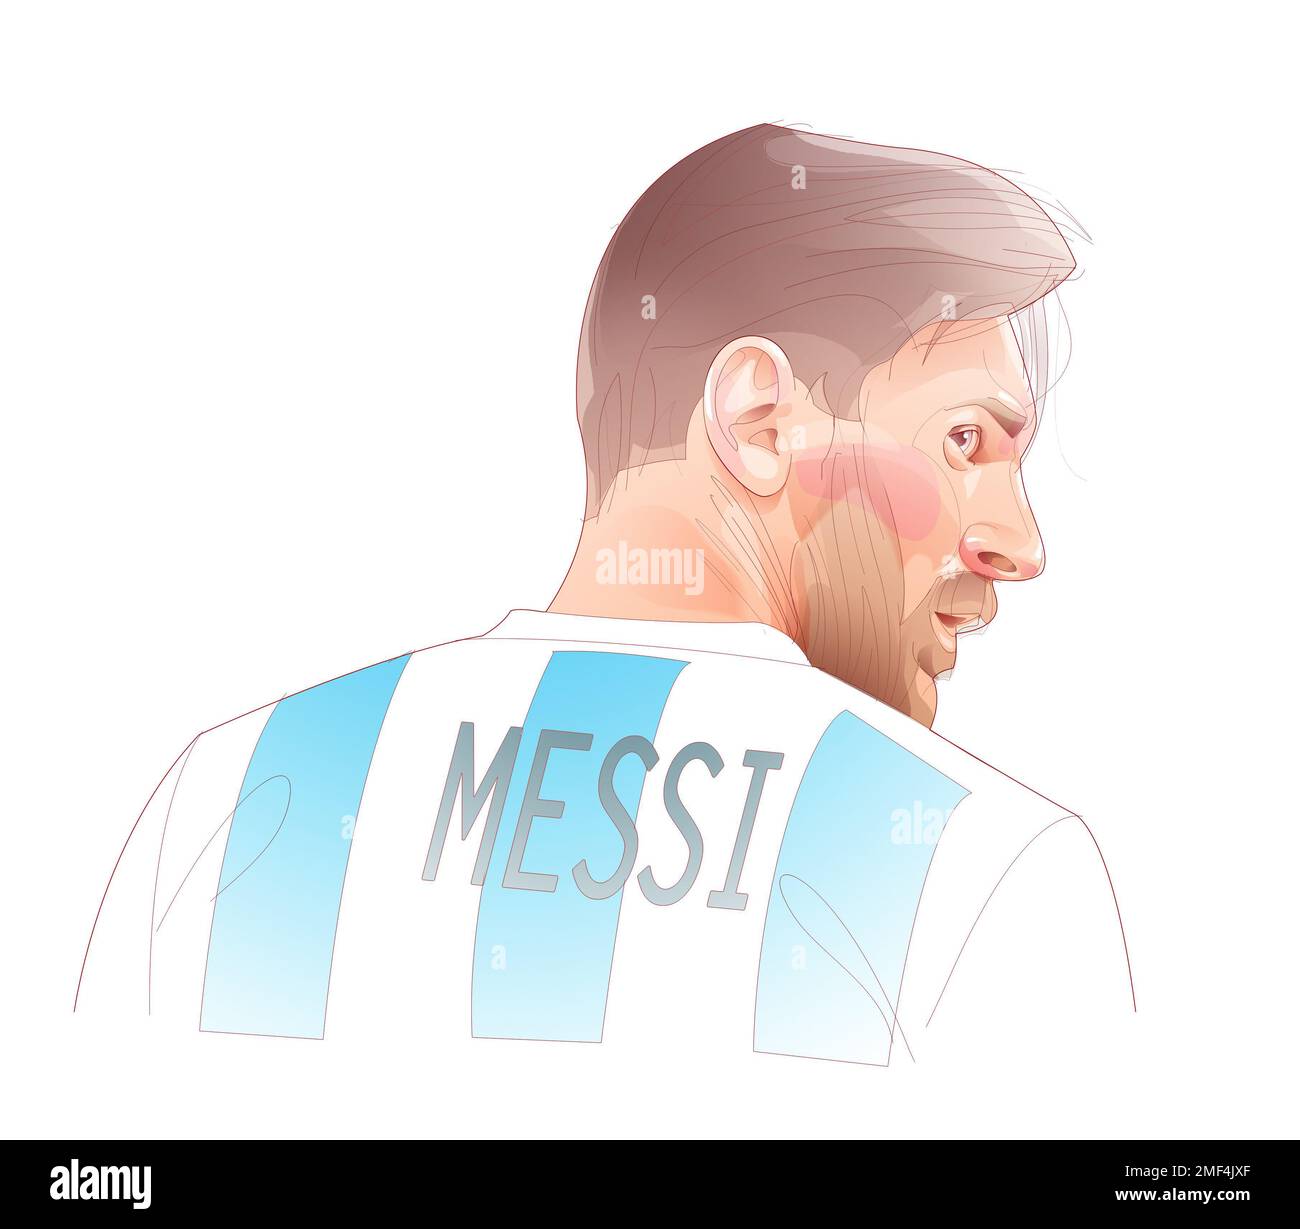 Illustration of soccer player Lionel Messi. With the shirt of the ...